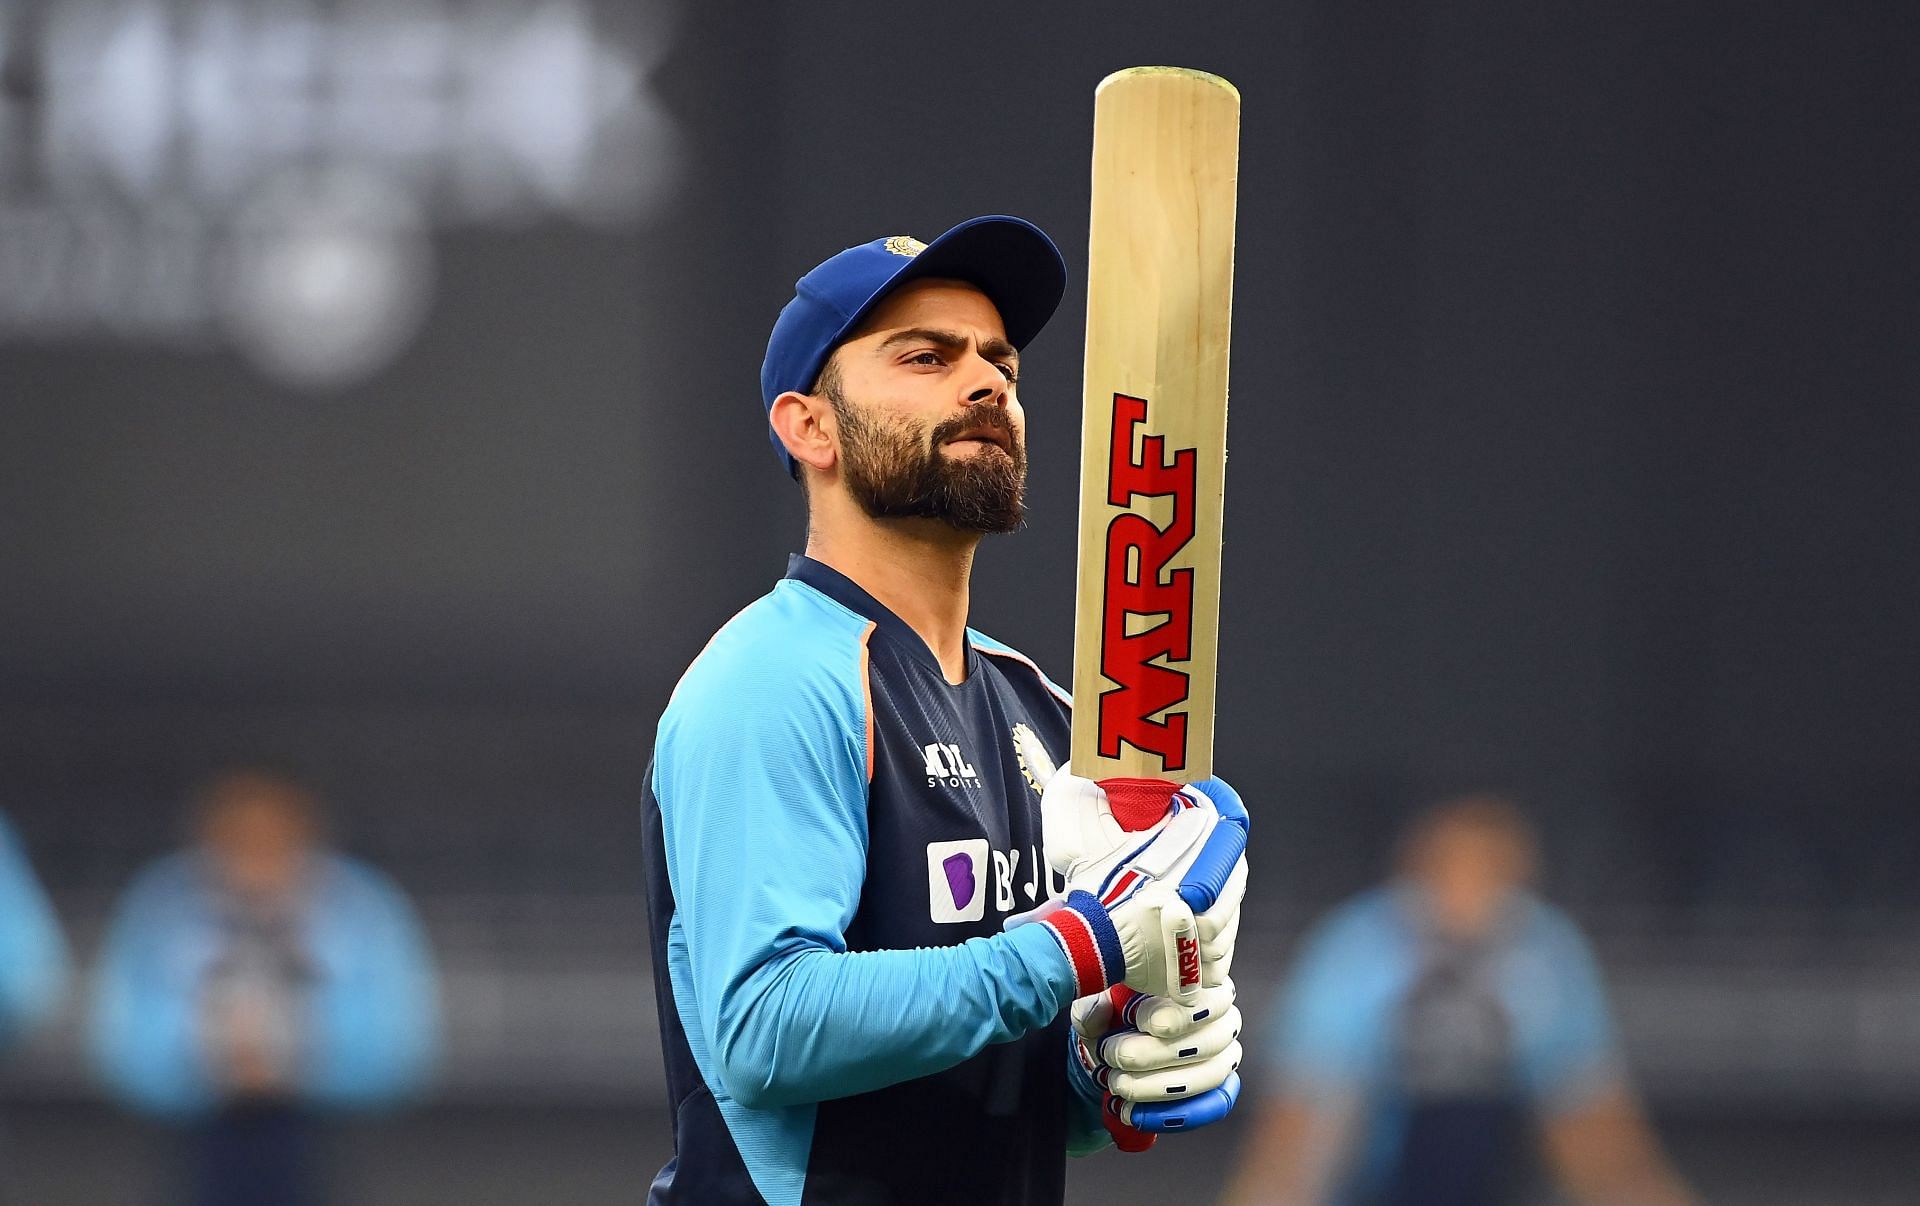 Virat Kohli will be hoping to be back to his best in the second T20I against England